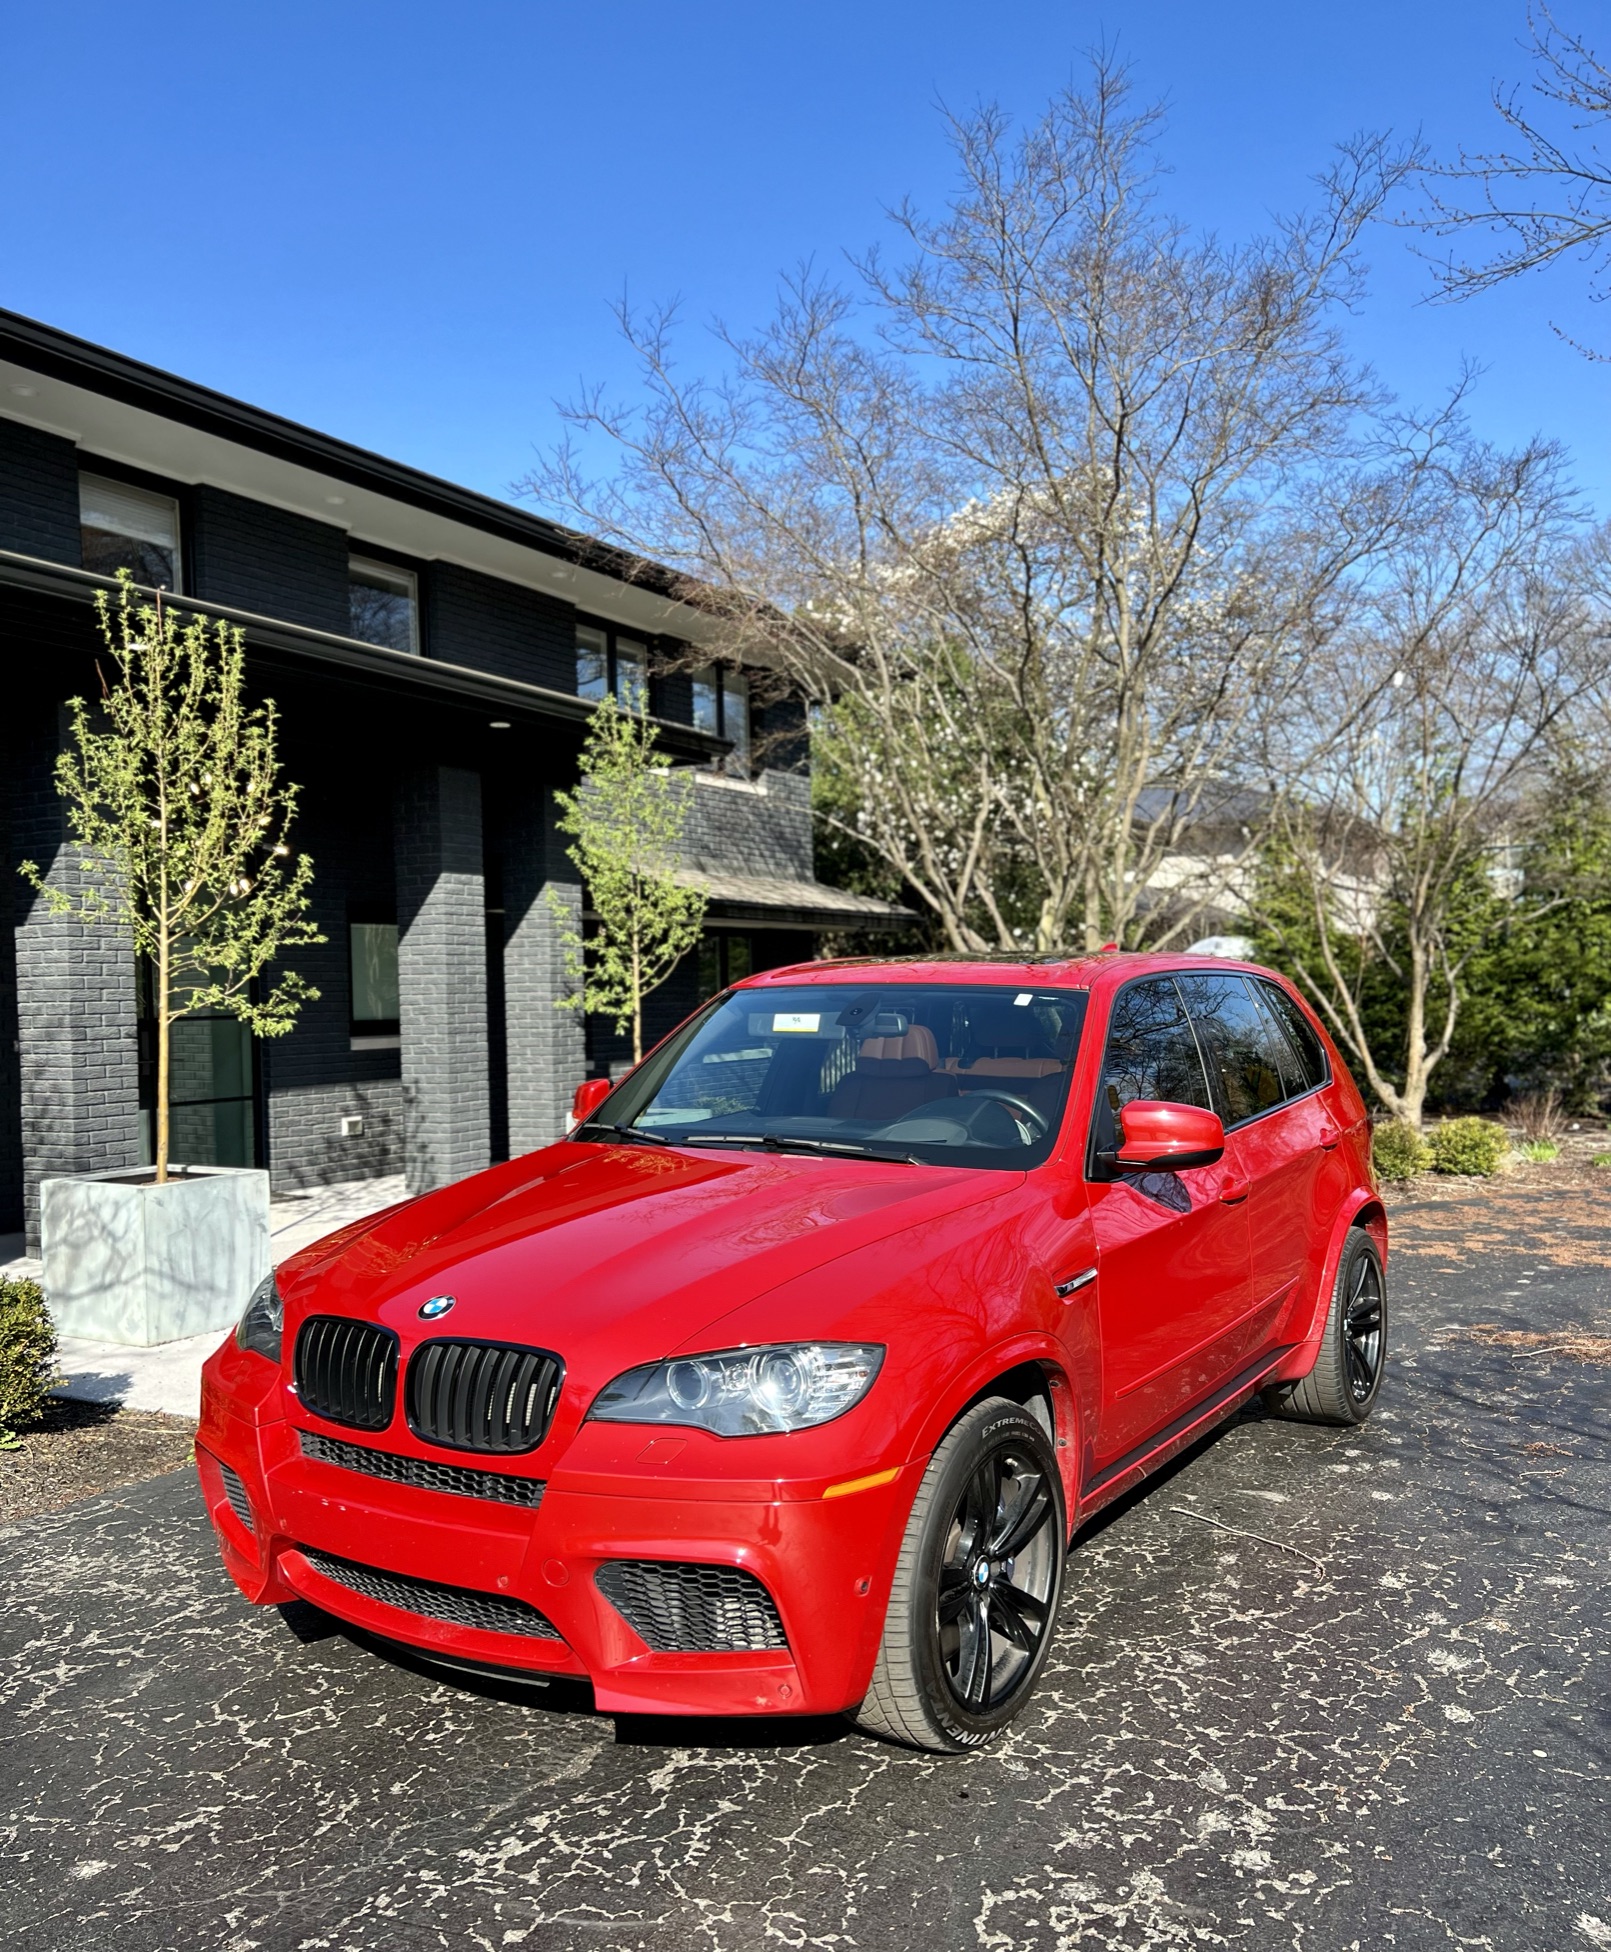 Used BMW X5 M for Sale Right Now - Autotrader